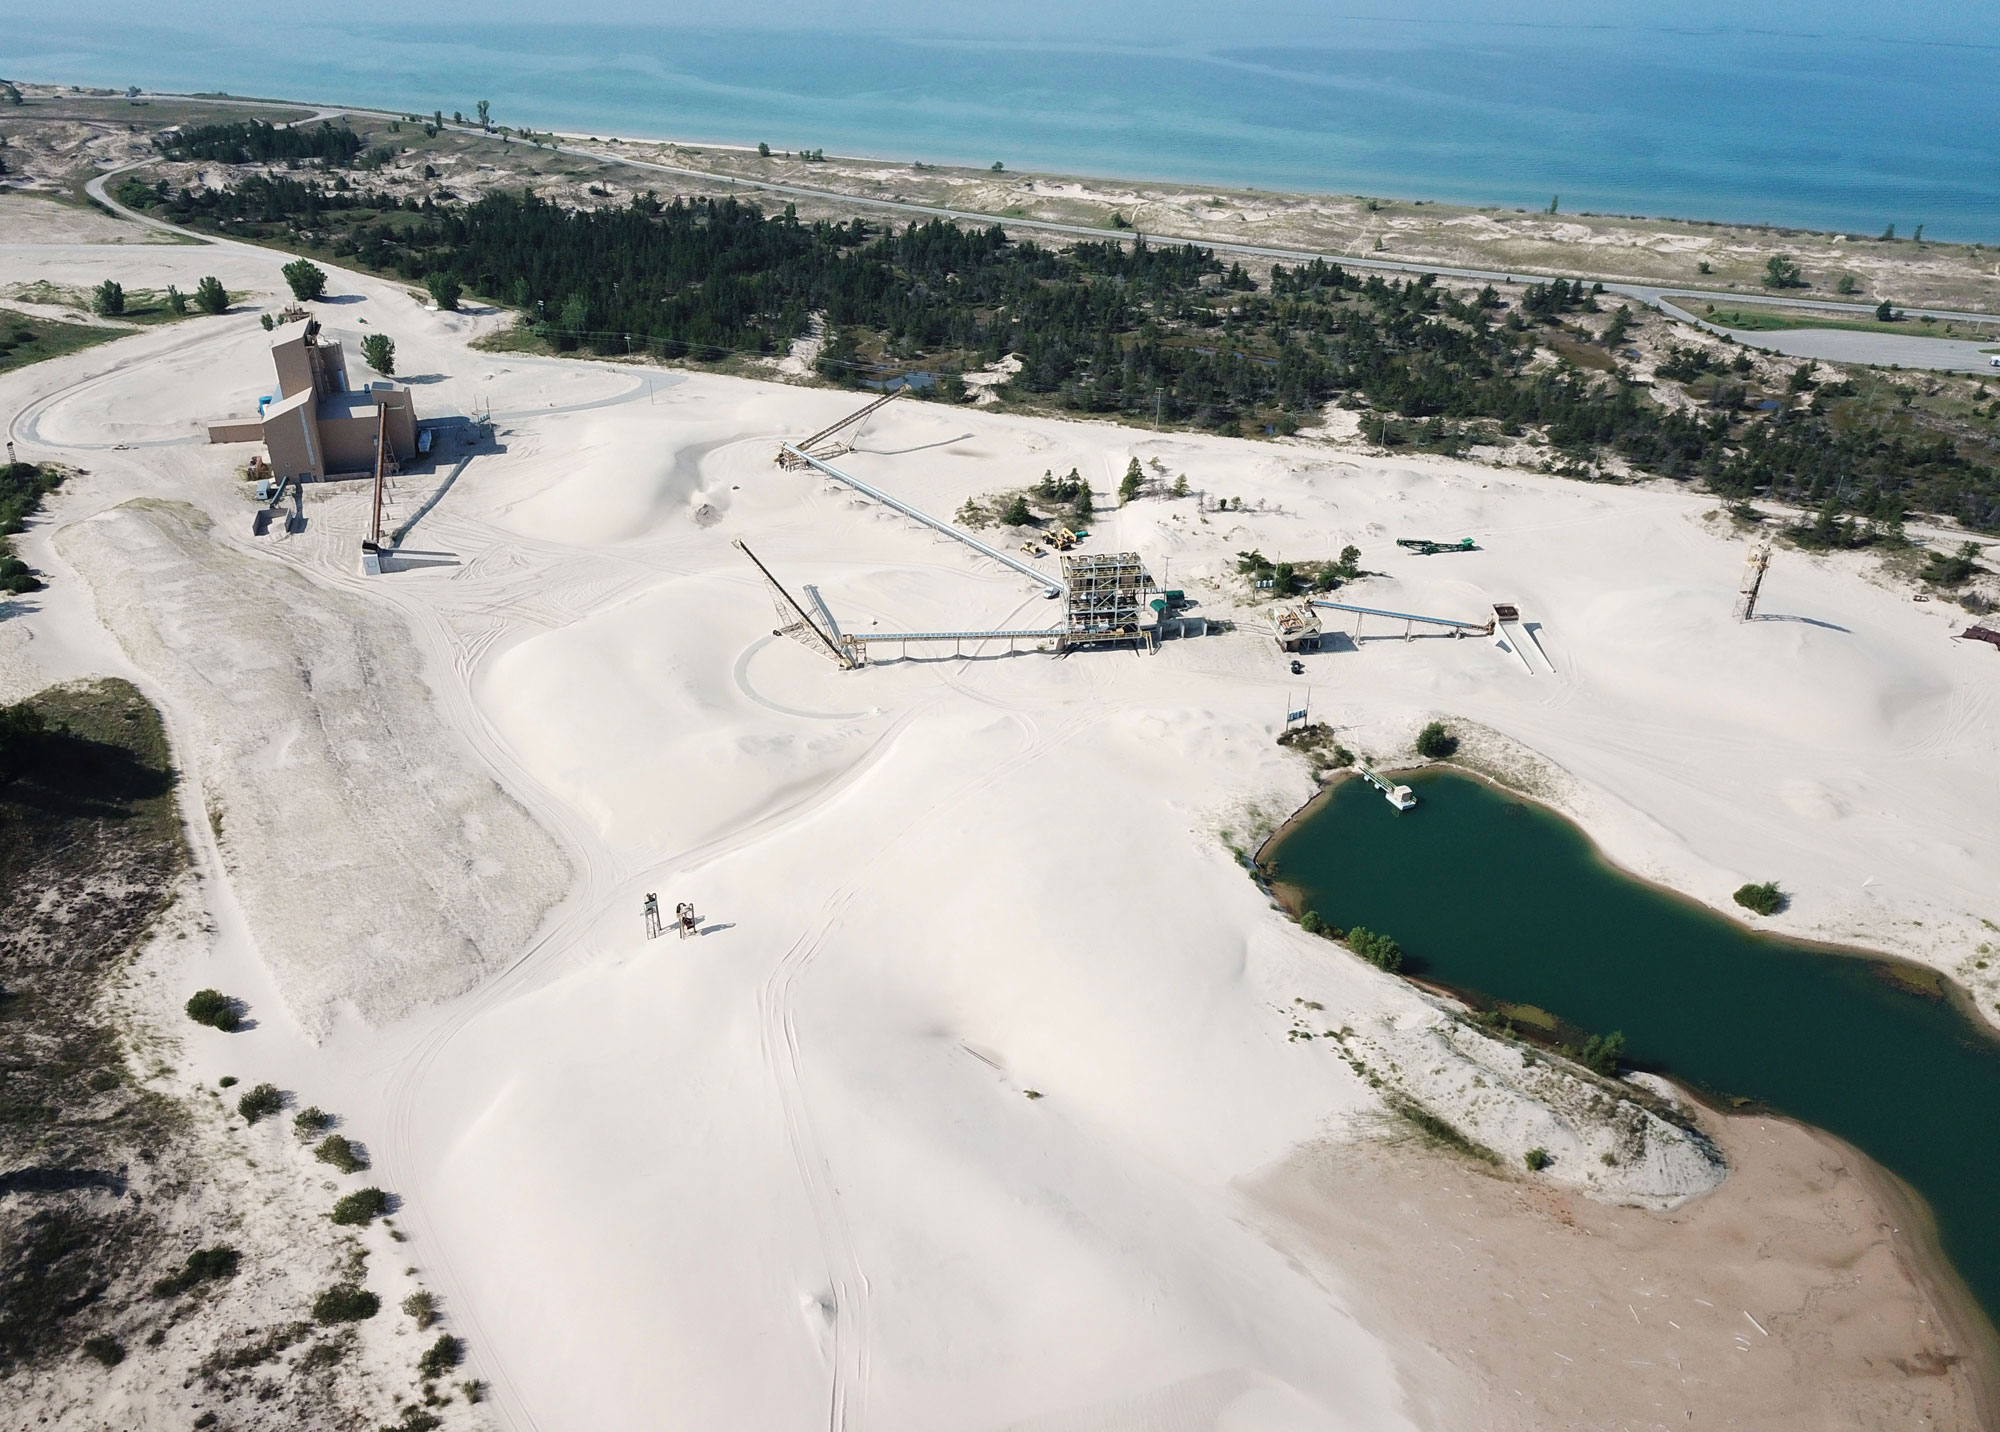 Photograph of a sand dune mine in Michigan. The photograph shows mining structures on a dune made up of off-white sand. In the lower right corner of the image is a pond. In the background, from upper left to slightly lower on the right is the Lake Michigan shoreline. The sand mine is separated from the shore by a patch of trees.